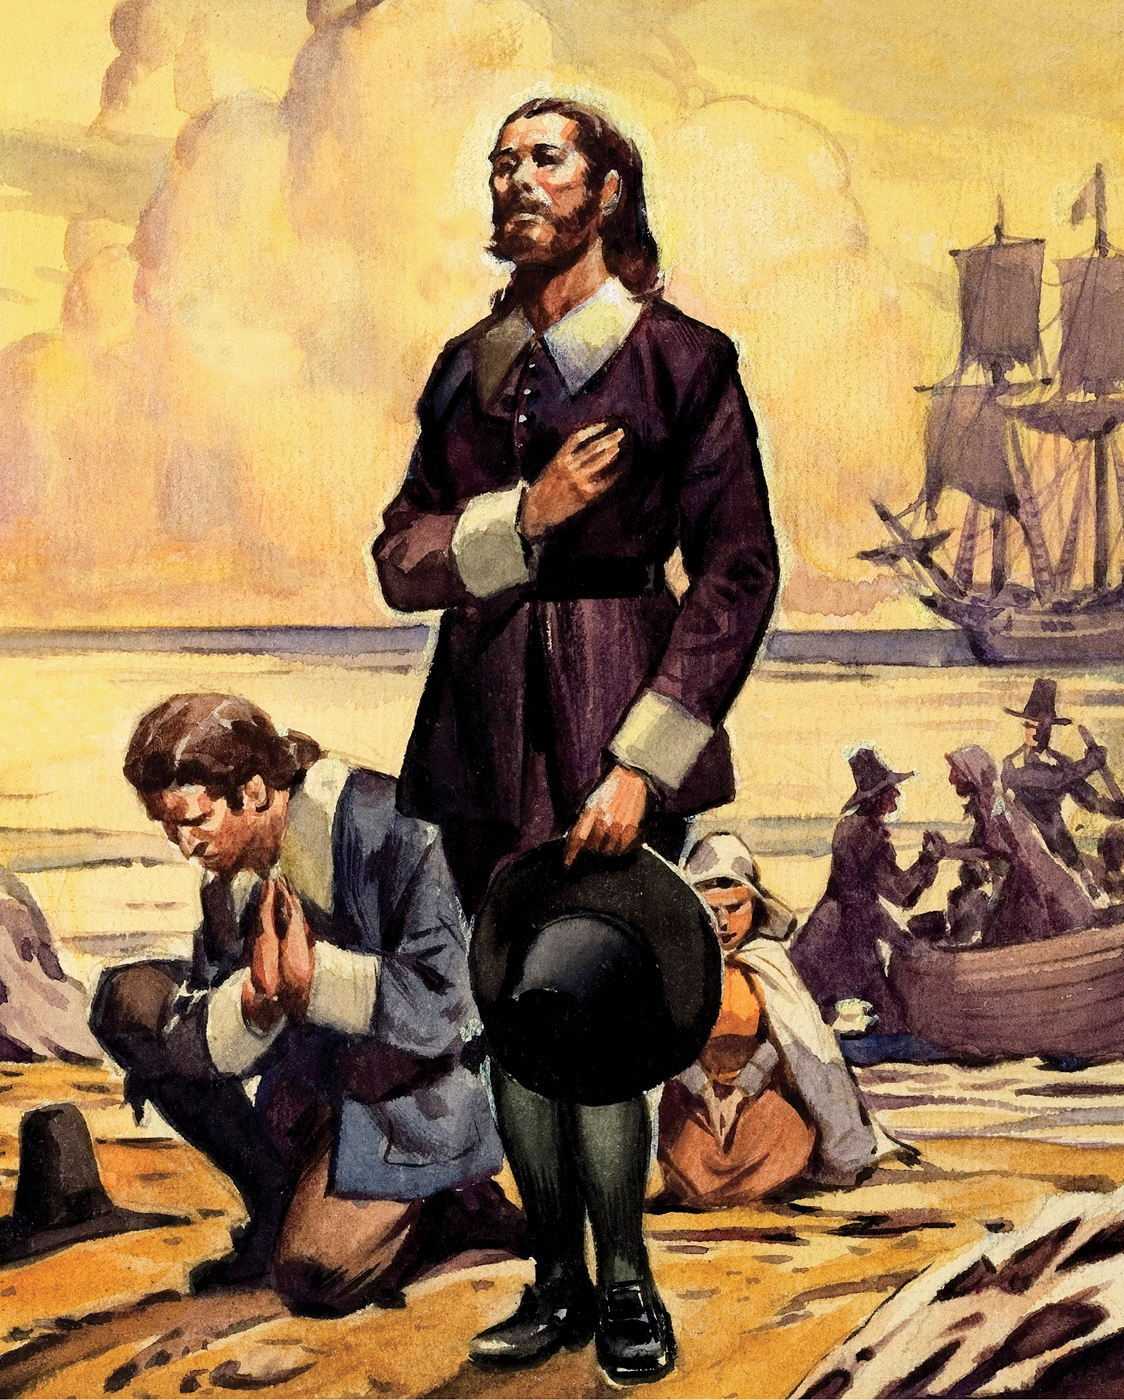 Pilgrim fathers arriving in America Freedom of Worship by Norman - photo 2